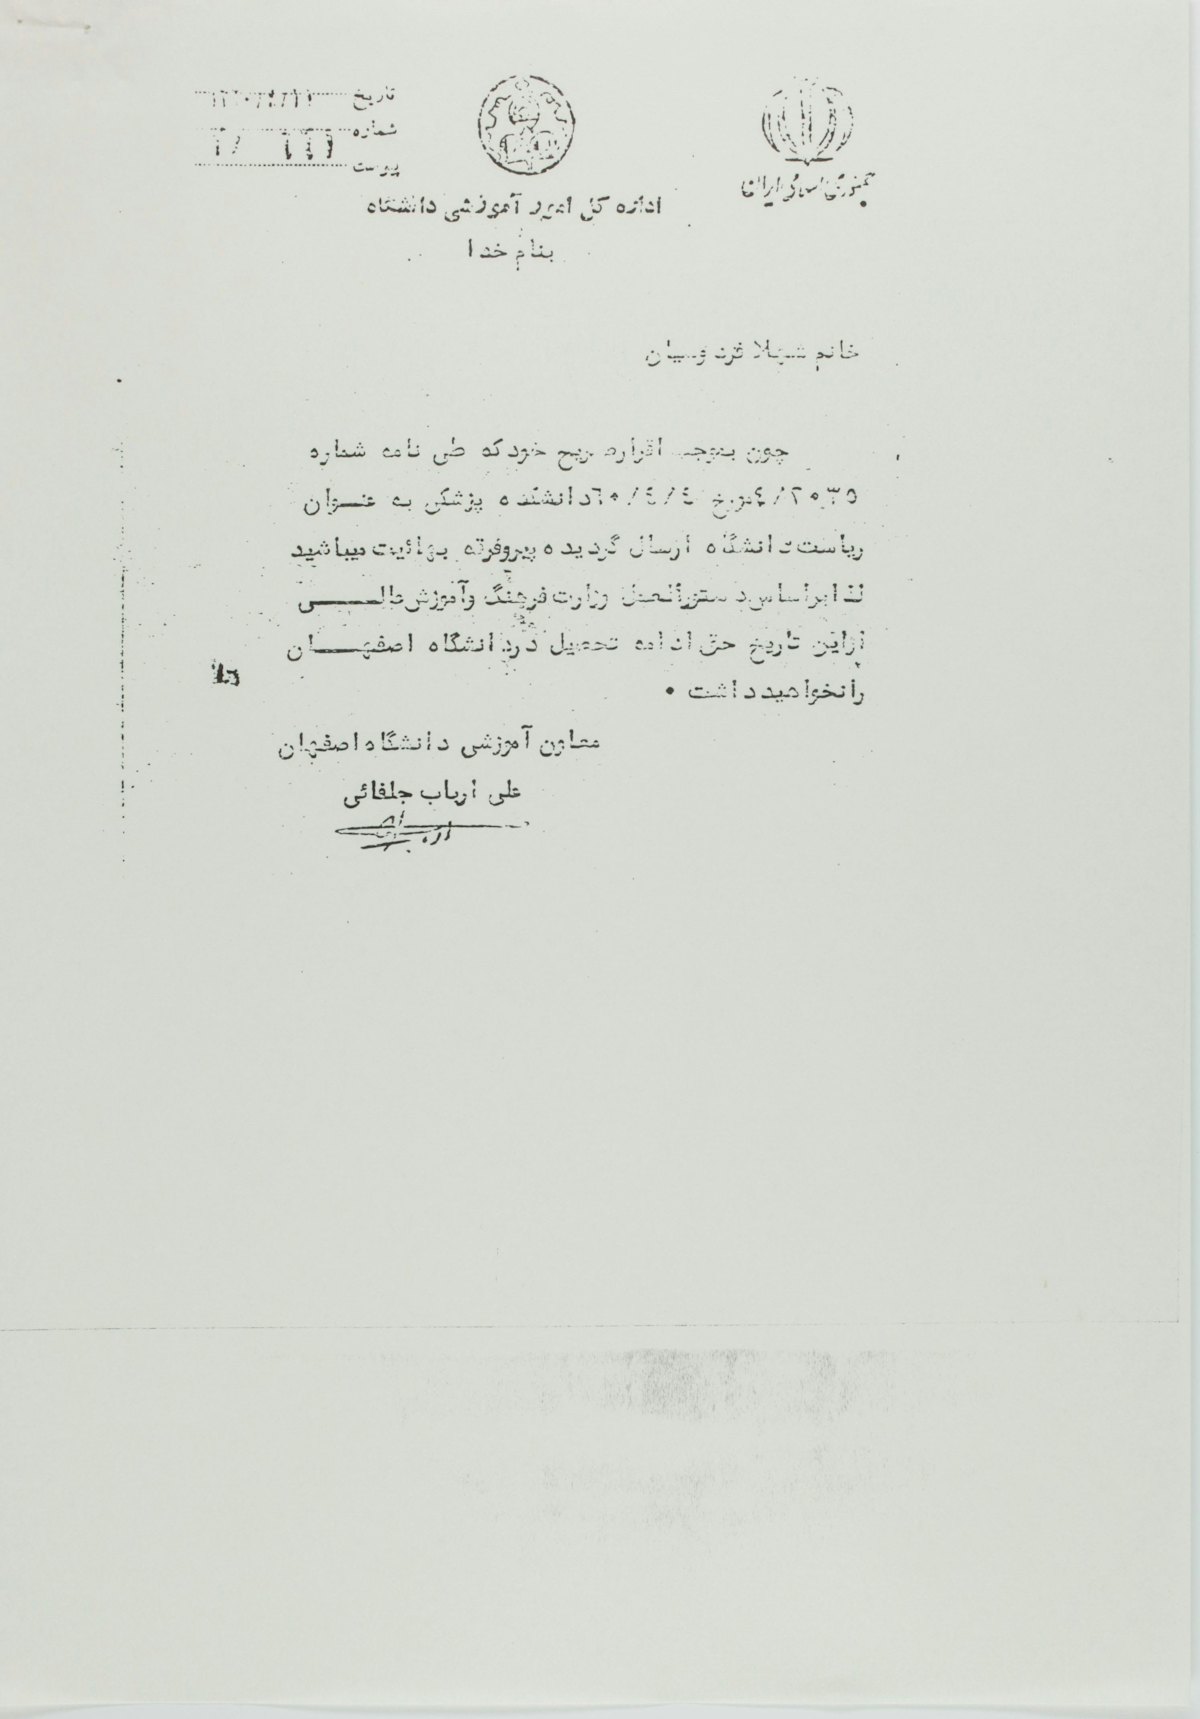 A letter from the General Affairs Educational Office of the University of Isfahan to a student states that, as she is “a follower of the Baha’i sect”, she is “not permitted to pursue [her] studies.”